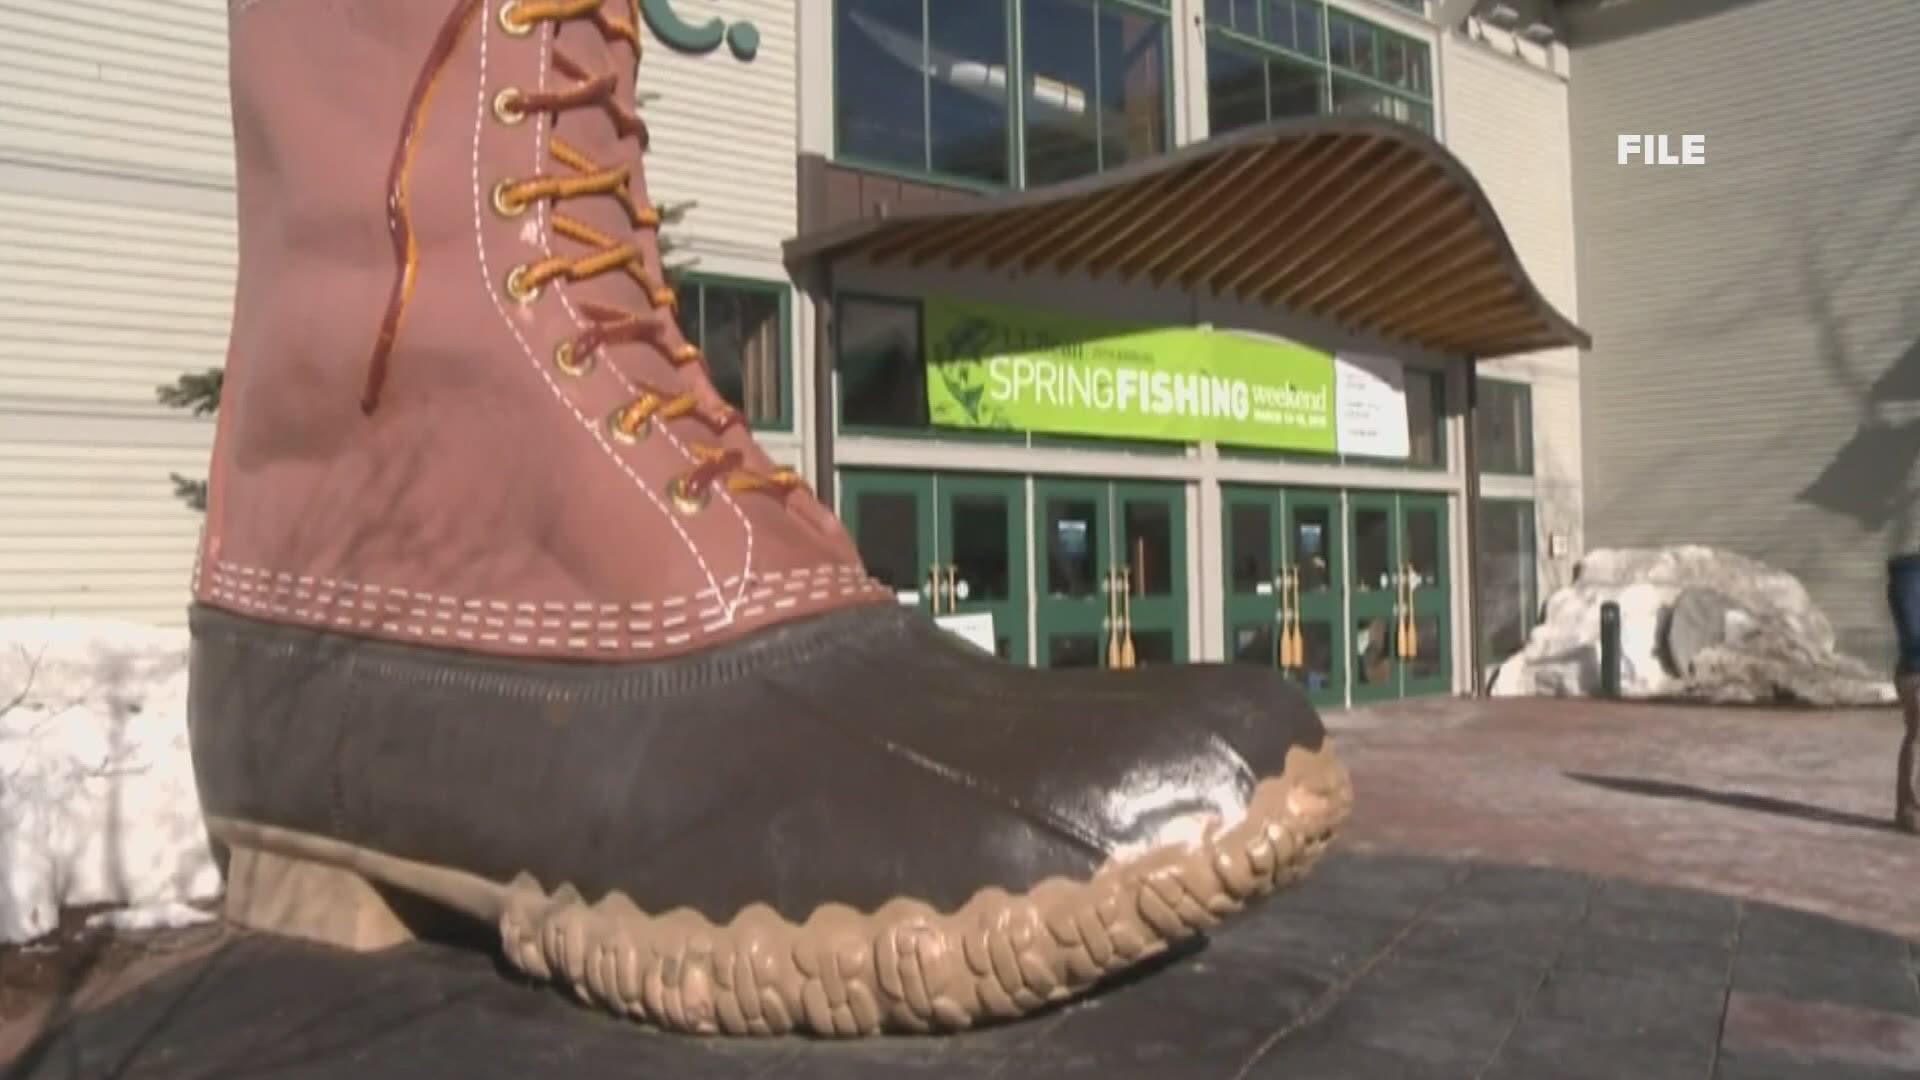 After 2 1/2 months of being closed due to the coronavirus pandemic, L.L. Bean has reopened but with strict precautions to protect customers and staff,